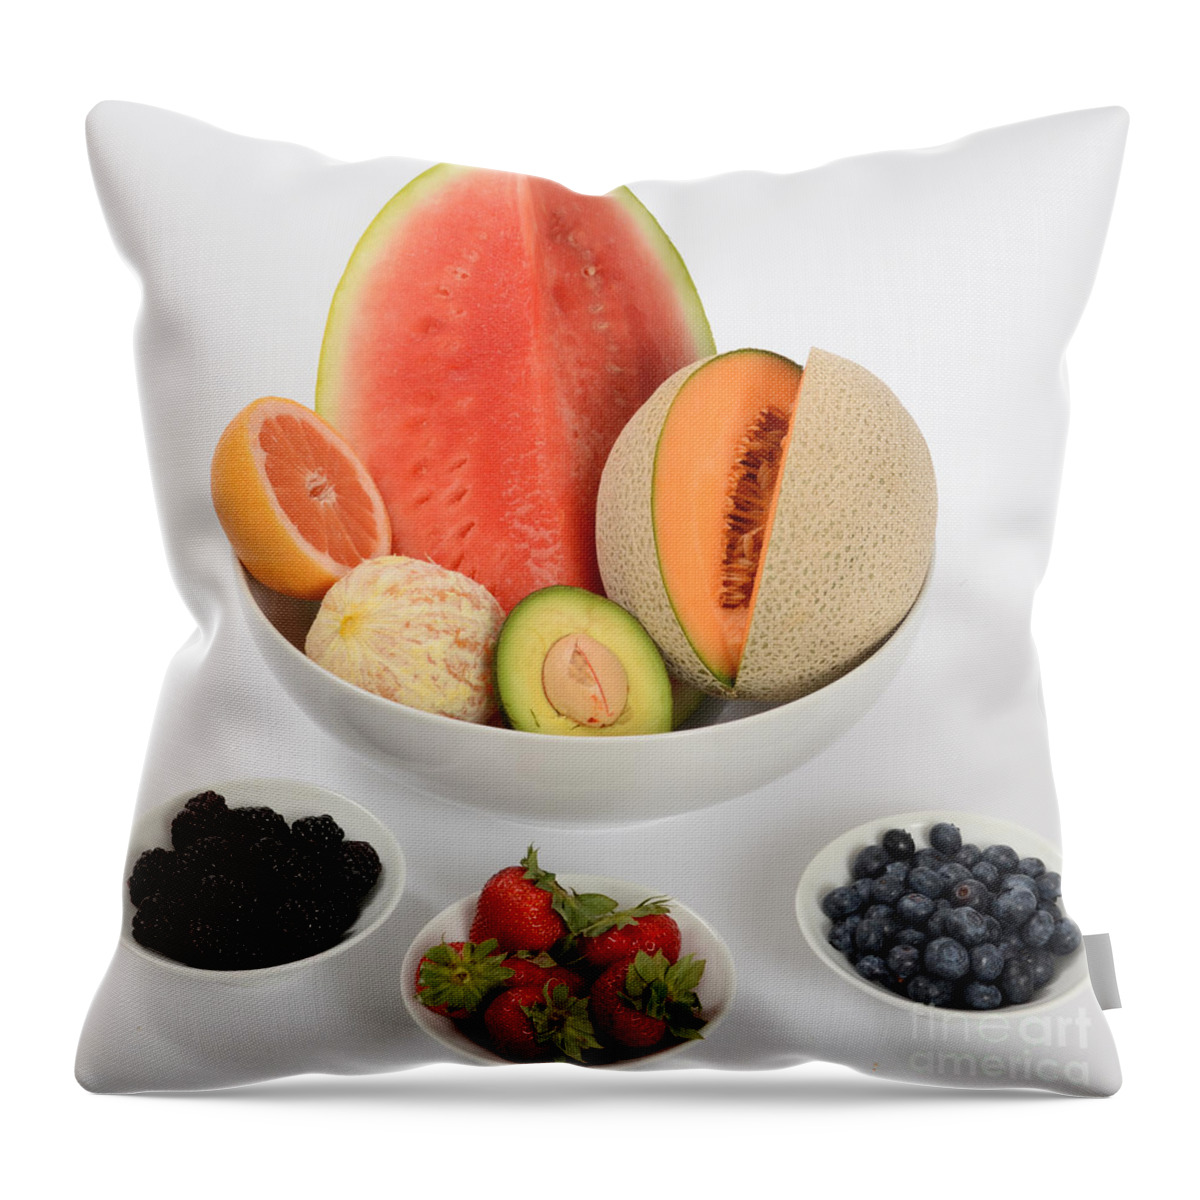 Assortment Throw Pillow featuring the photograph High Carbohydrate Fruit by Photo Researchers, Inc.